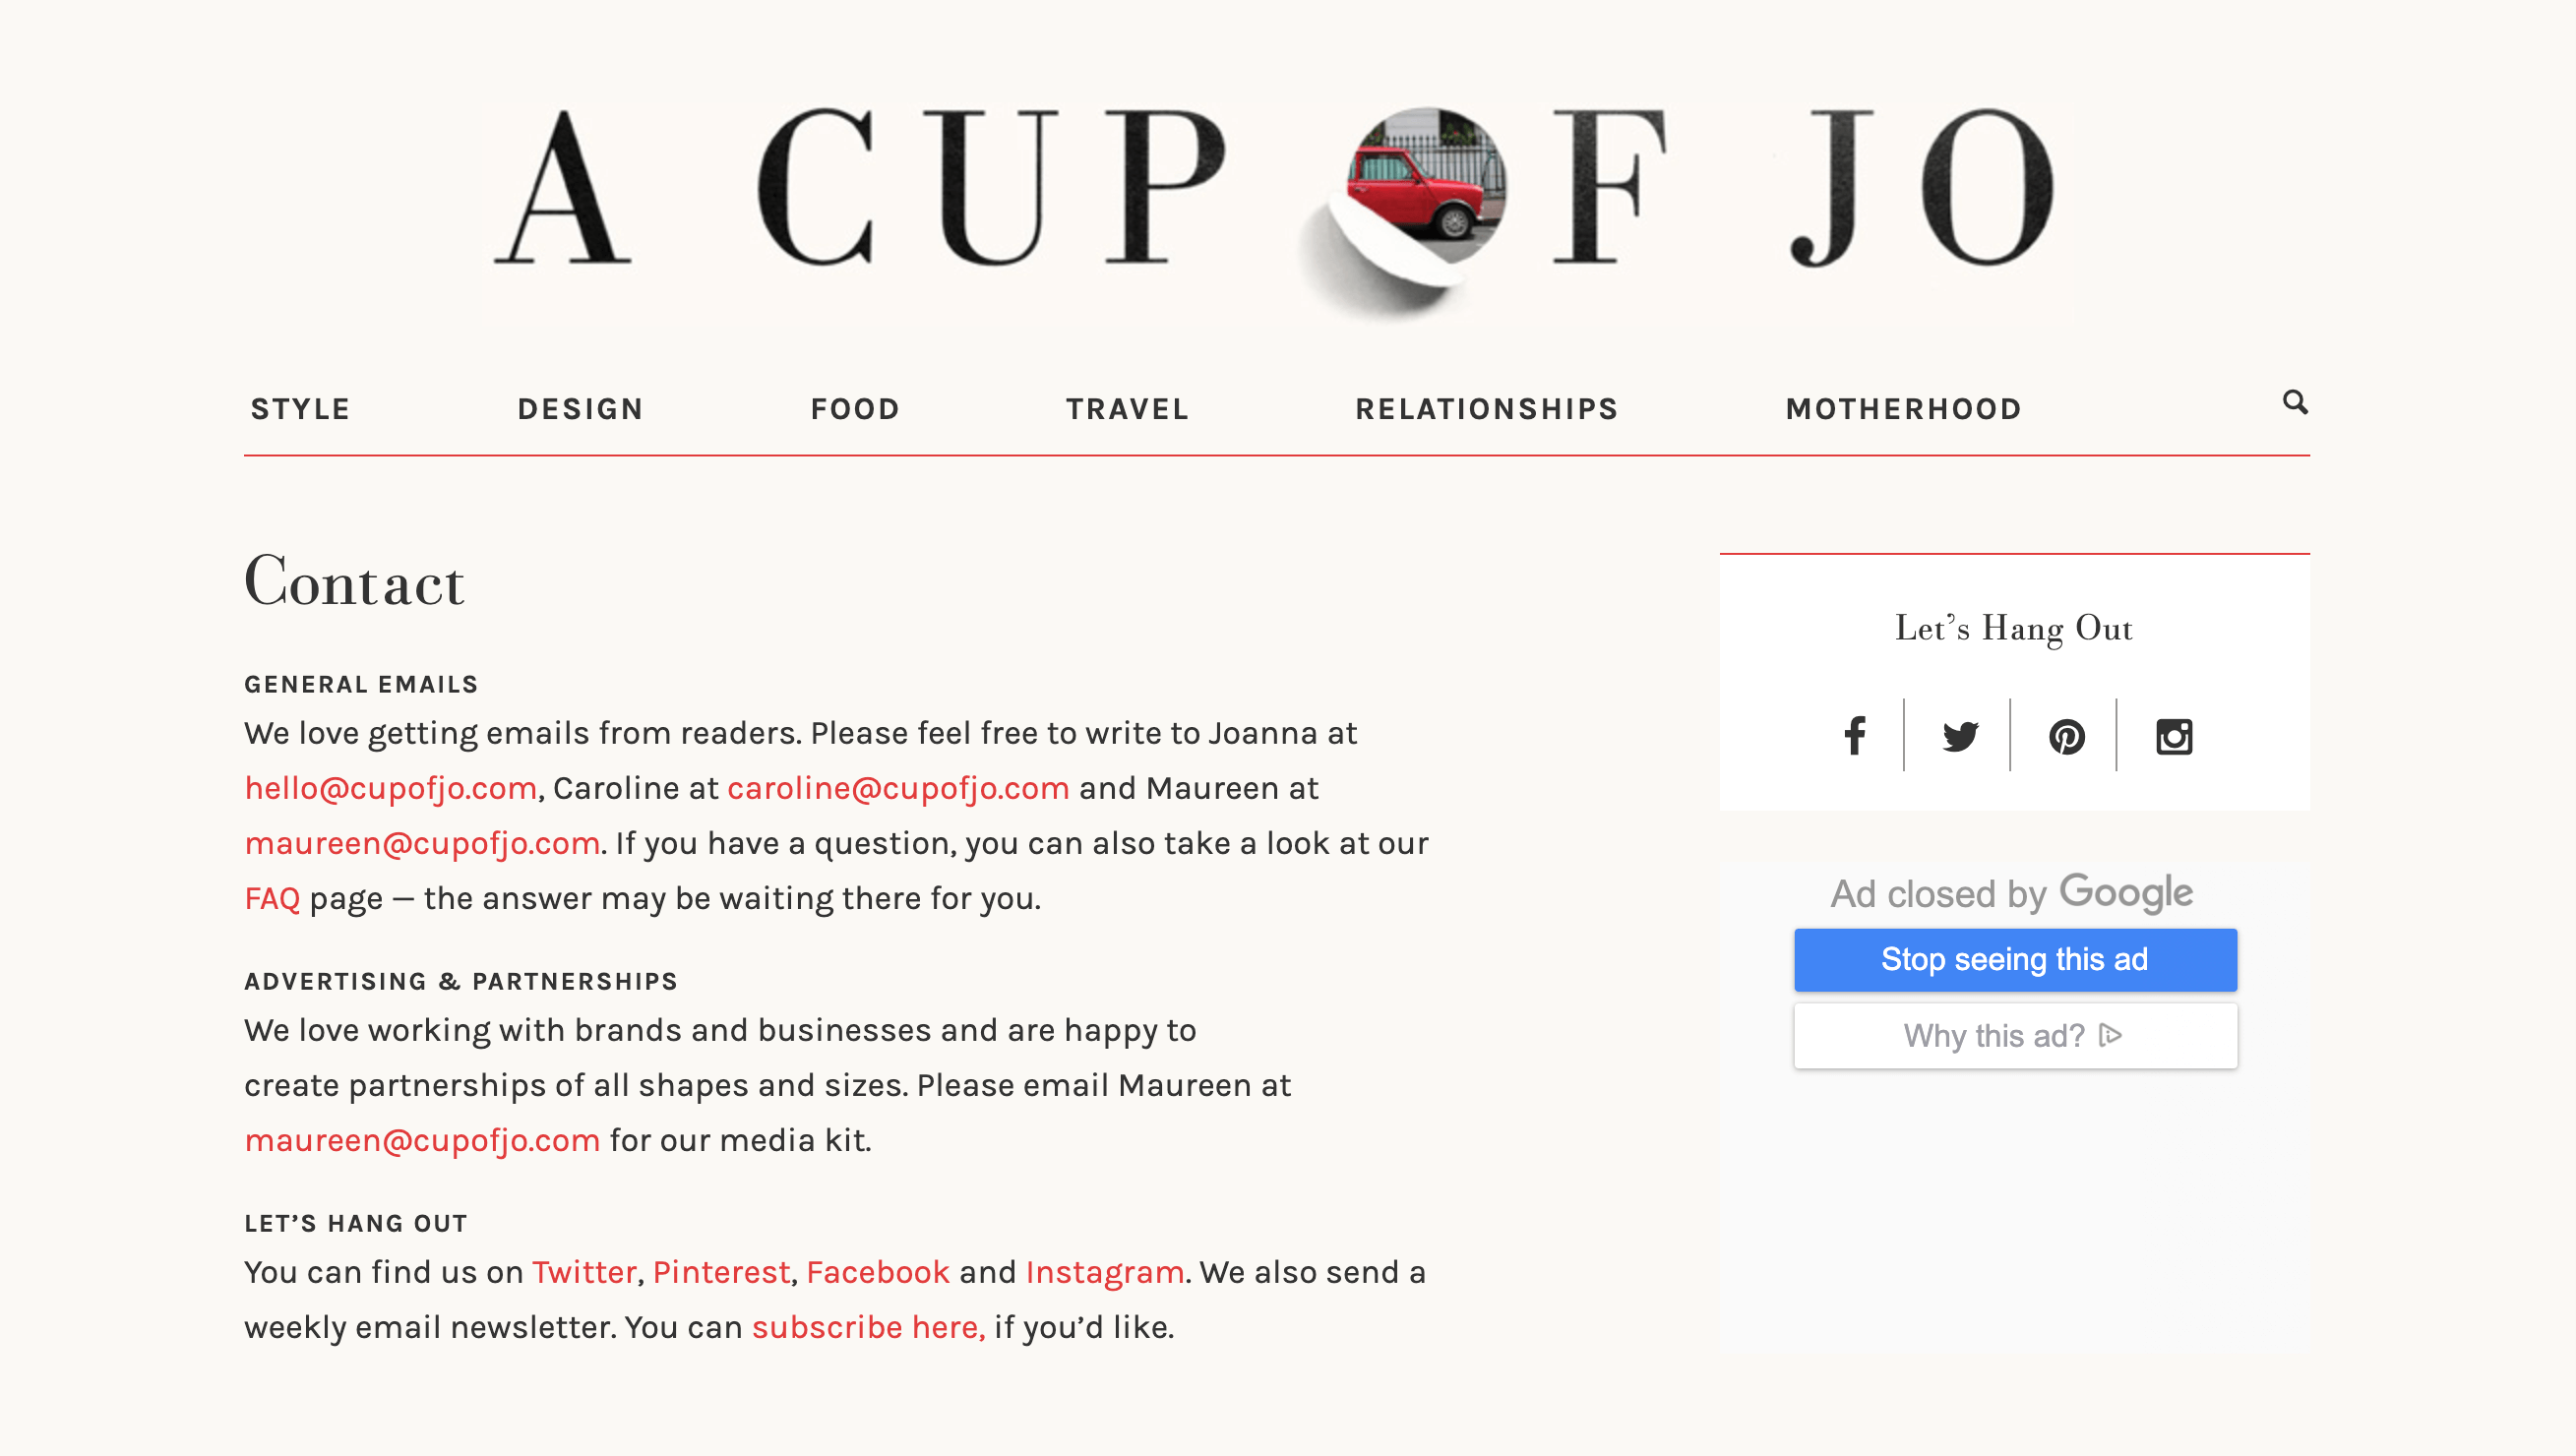 The Cup of Jo blog contact section for advertising and partnerships.